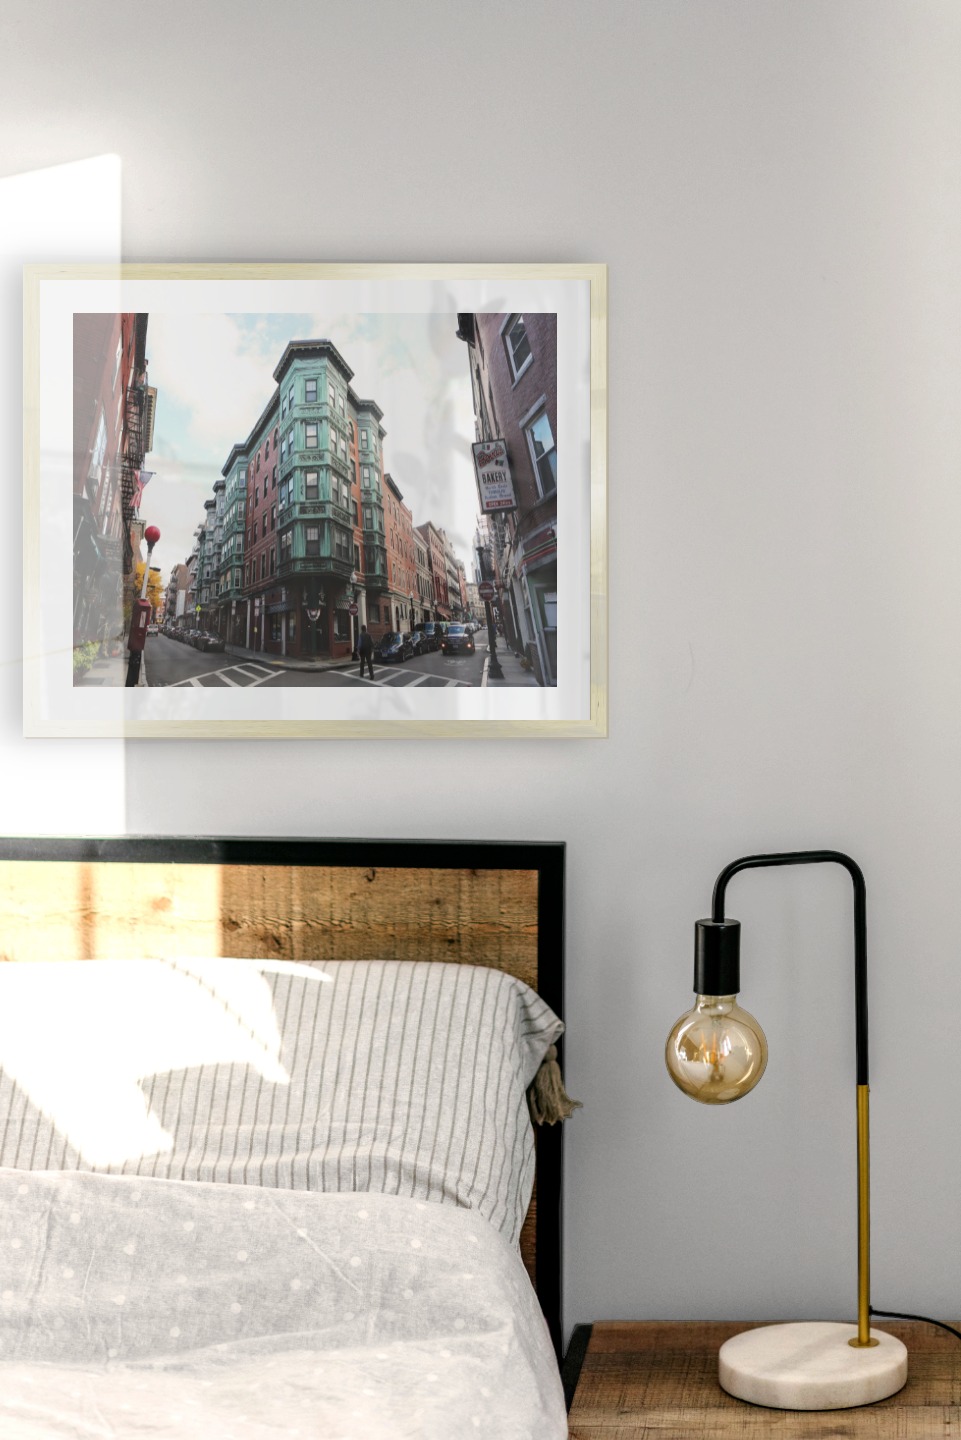 Gallery wall with picture frame in gold in size 40x50 with print "Street corner"